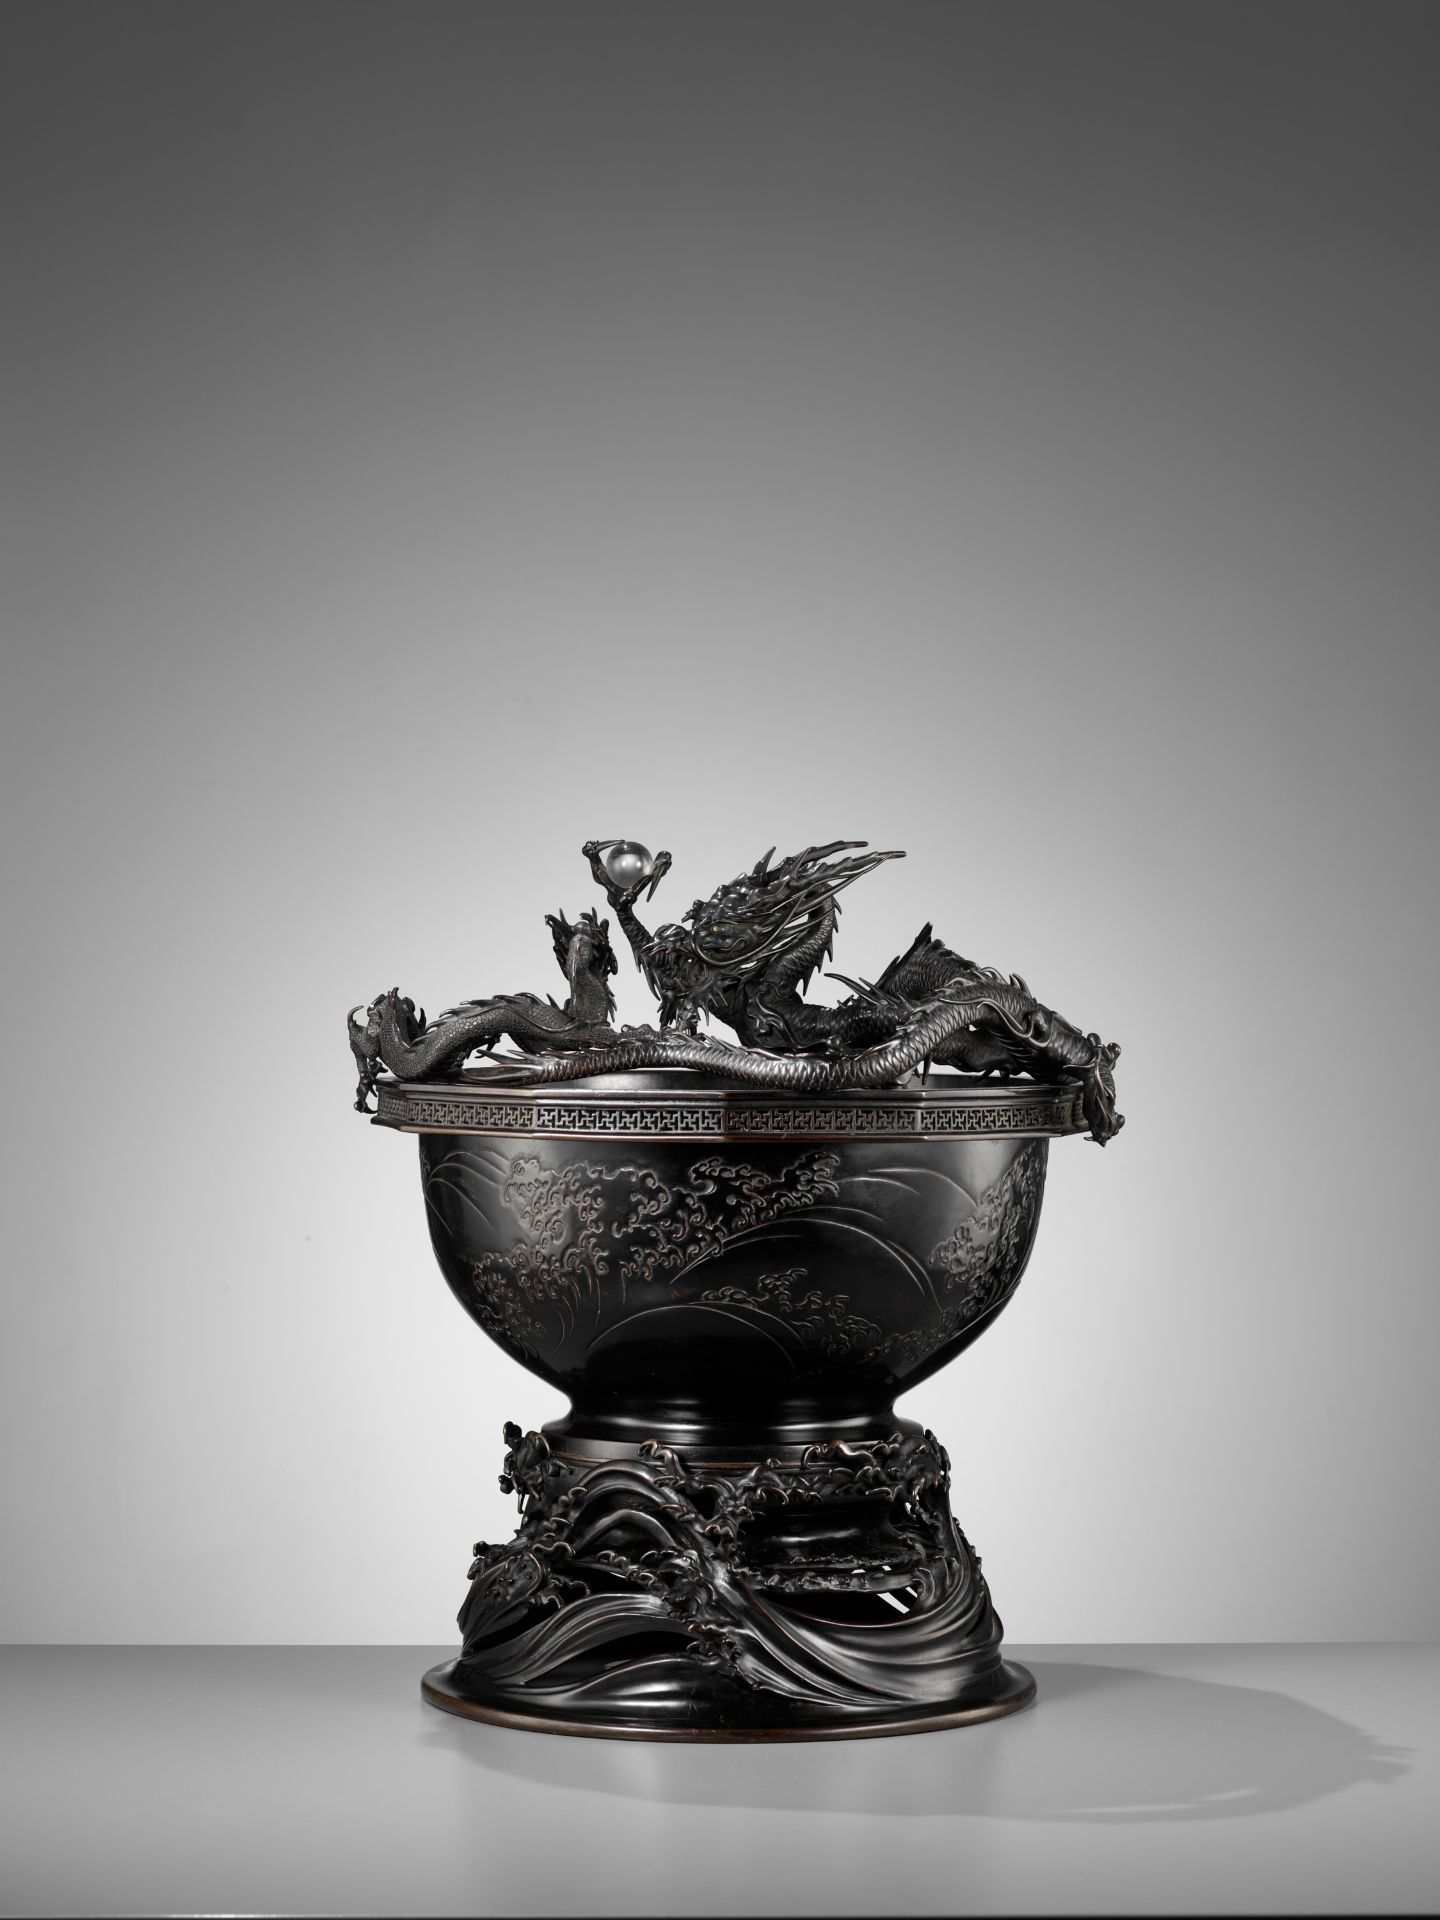 HIDEMITSU: A LARGE AND IMPRESSIVE BRONZE BOWL WITH TWO DRAGONS - Image 8 of 16